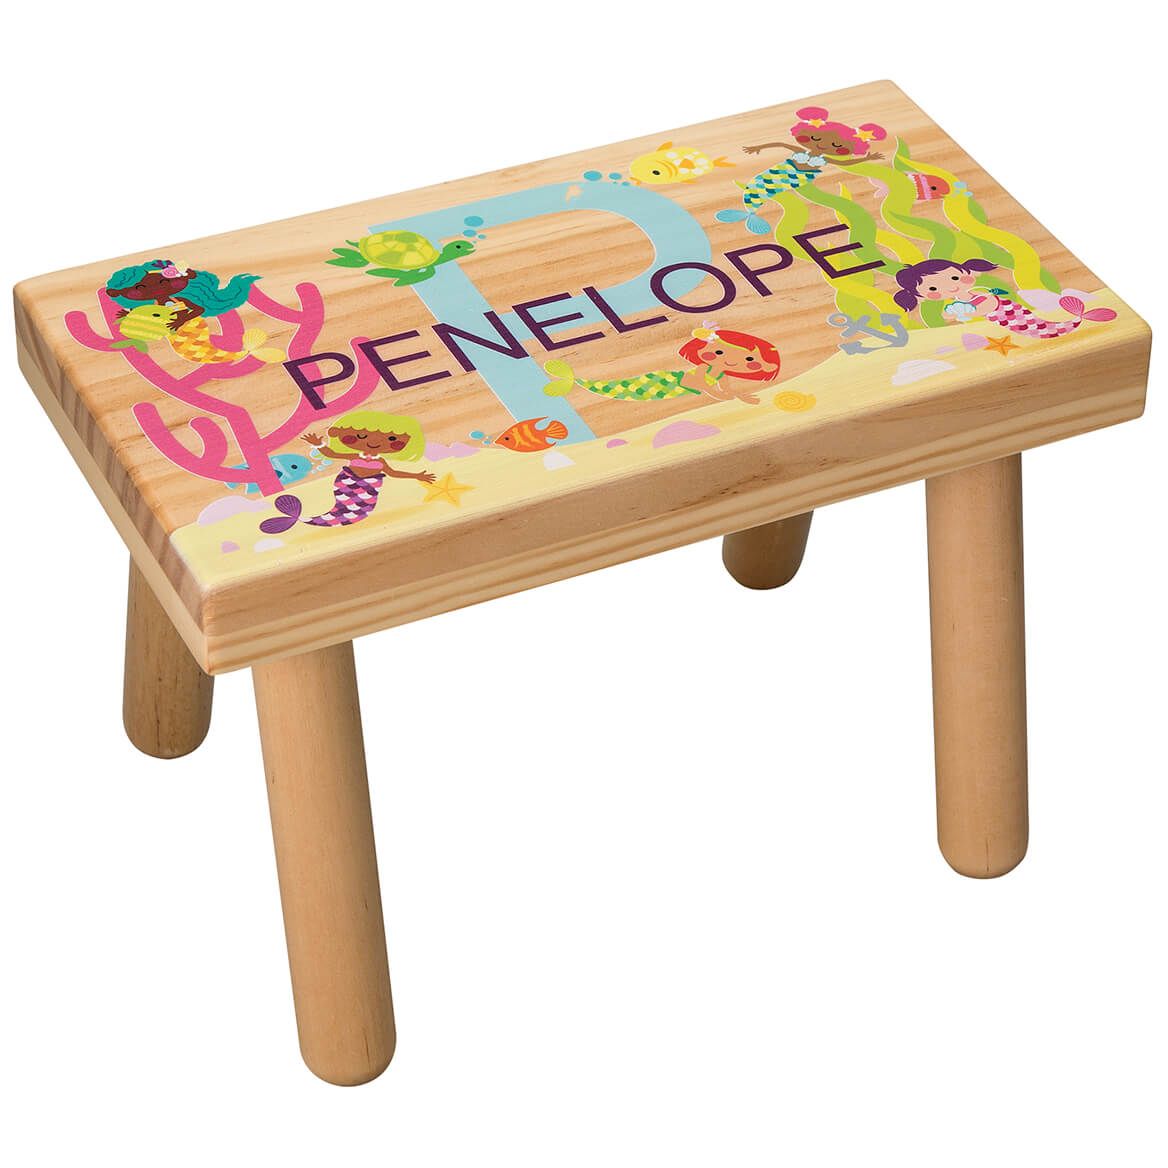 Personalized Under the Sea Children's Step Stool + '-' + 368054